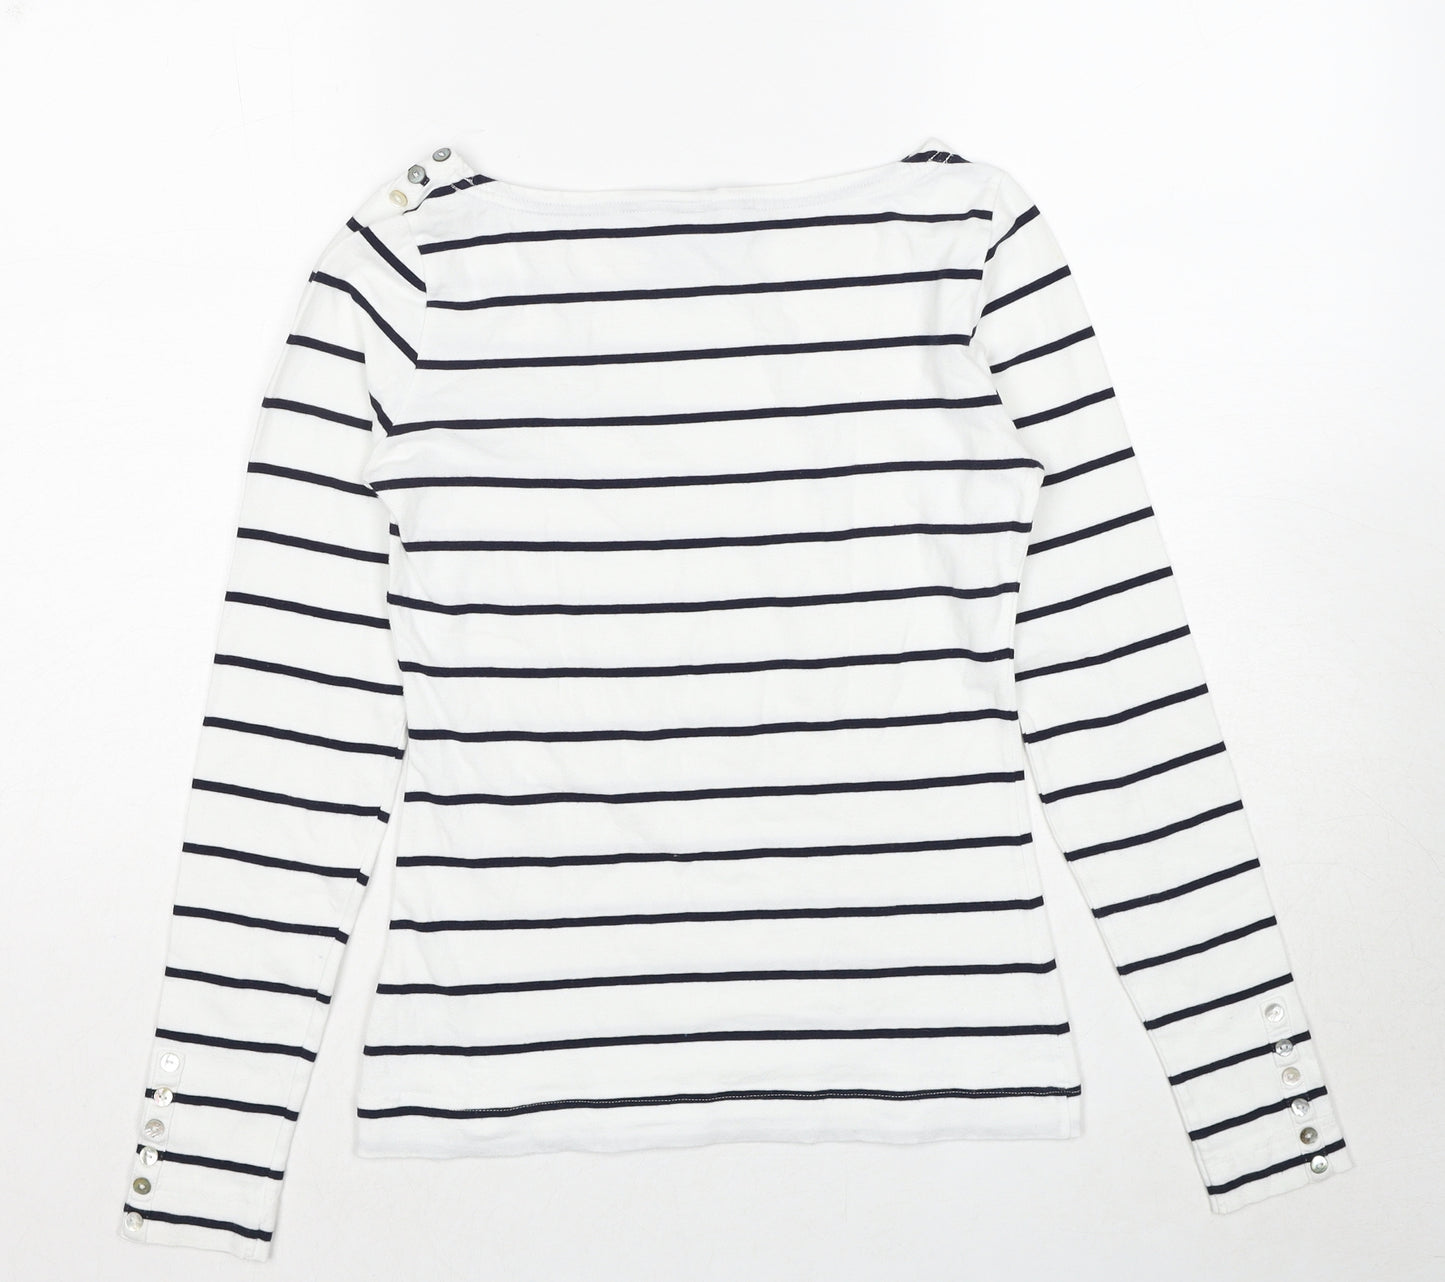 H&M Womens White Striped Polyester Basic T-Shirt Size M Boat Neck